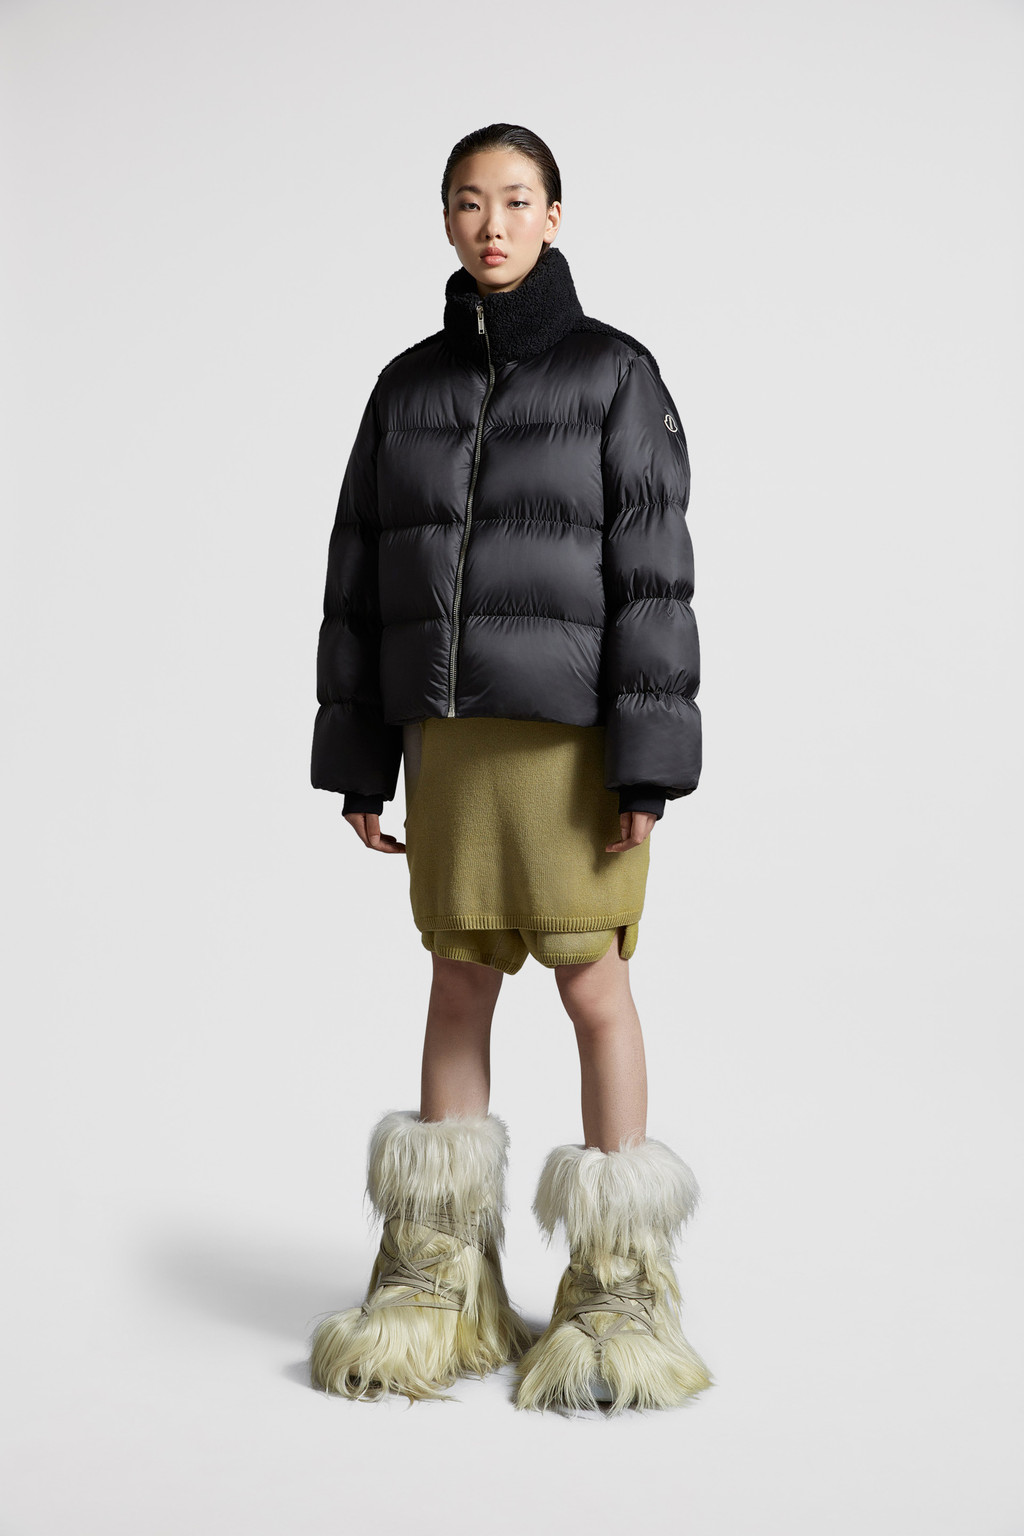 For Special Projects - Moncler + Rick Owens | Moncler US